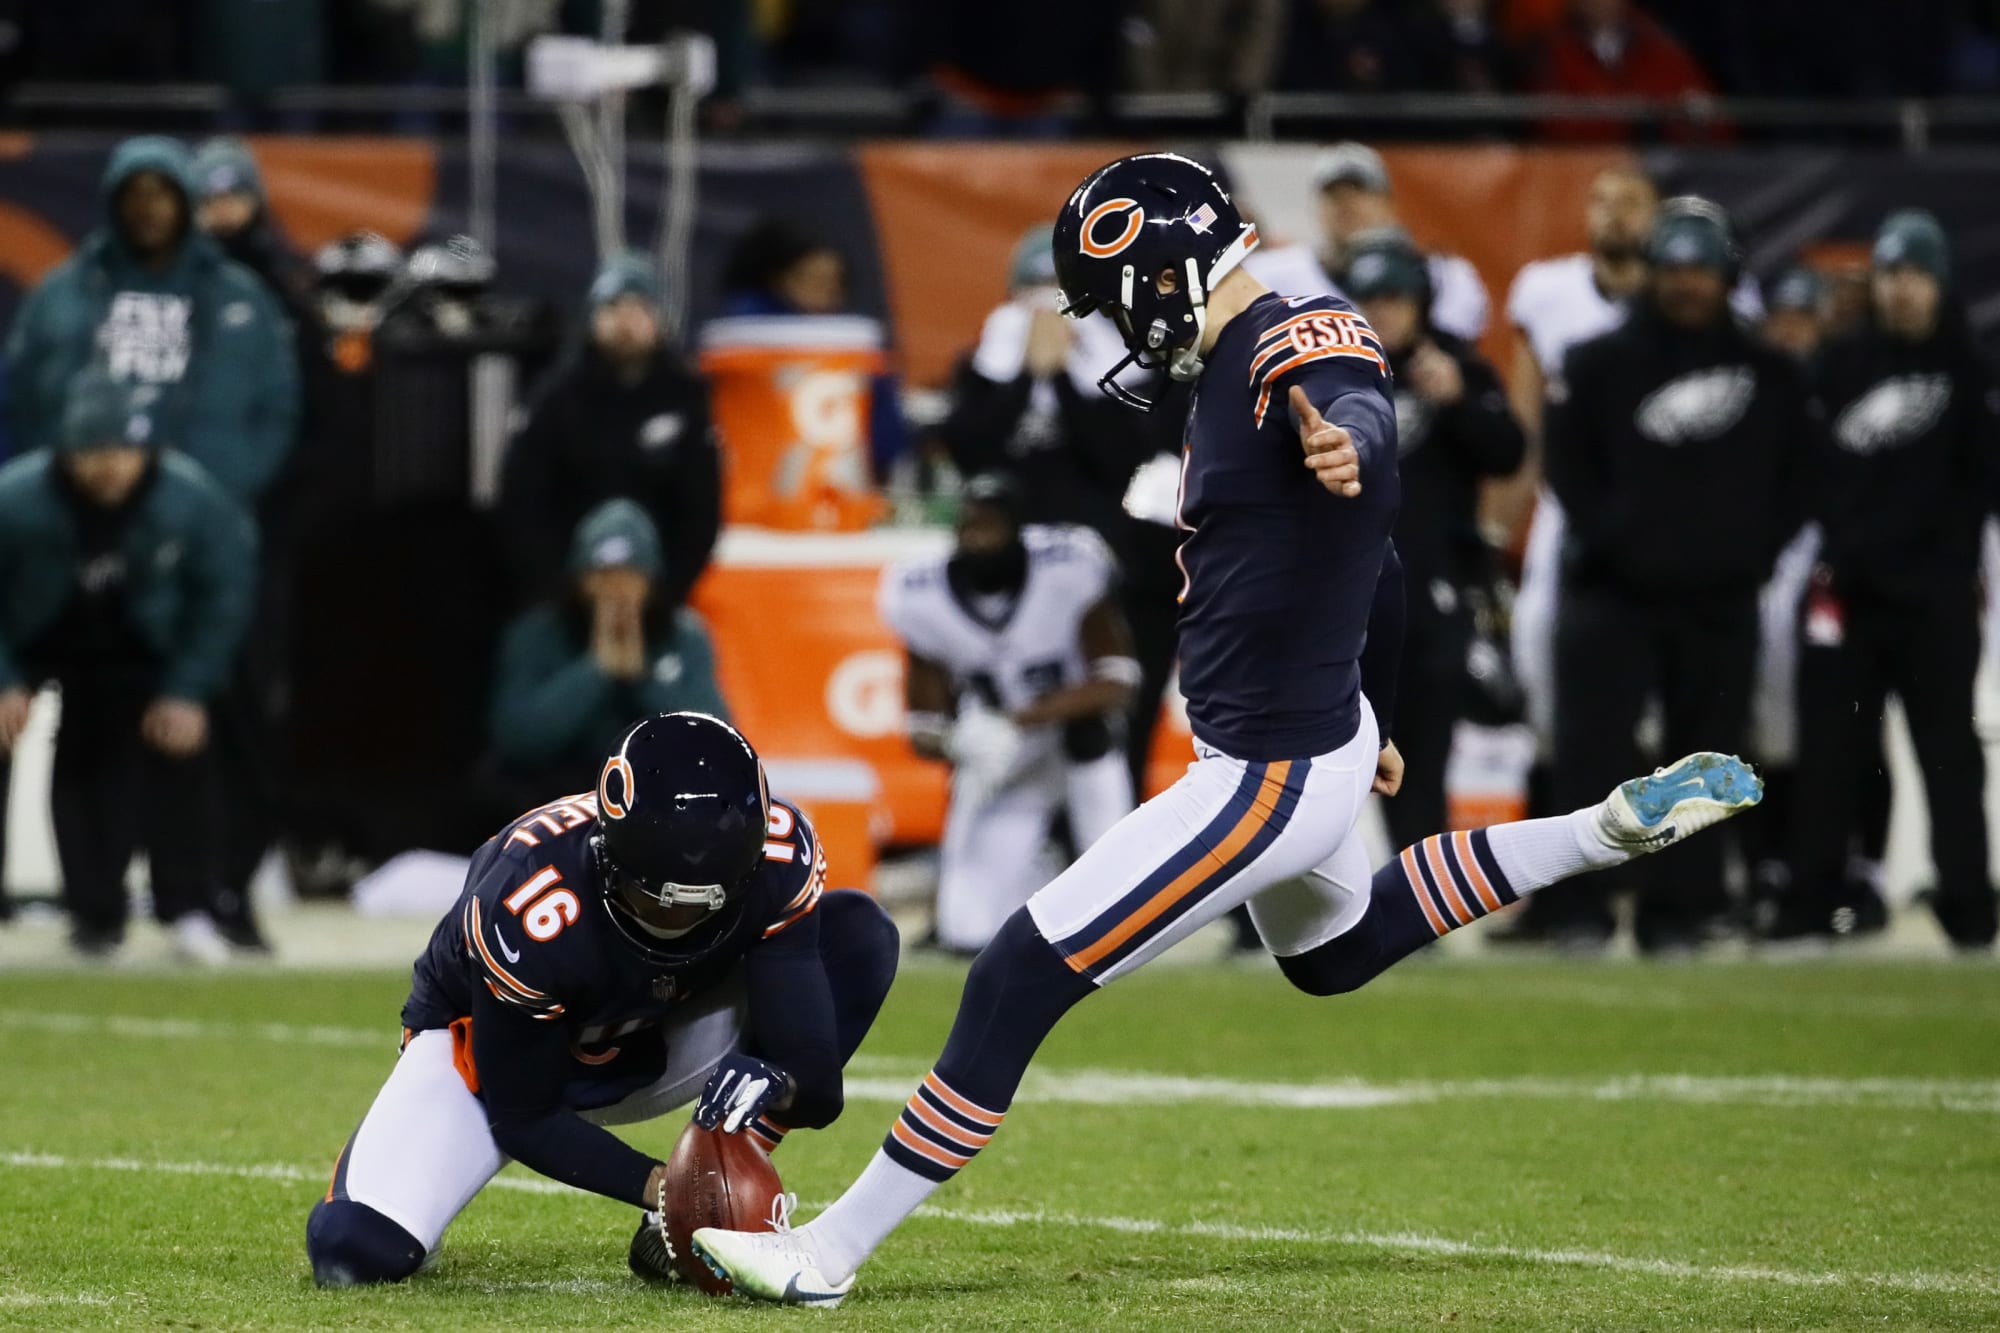 Chicago Bears Who is leading the kicking competition?